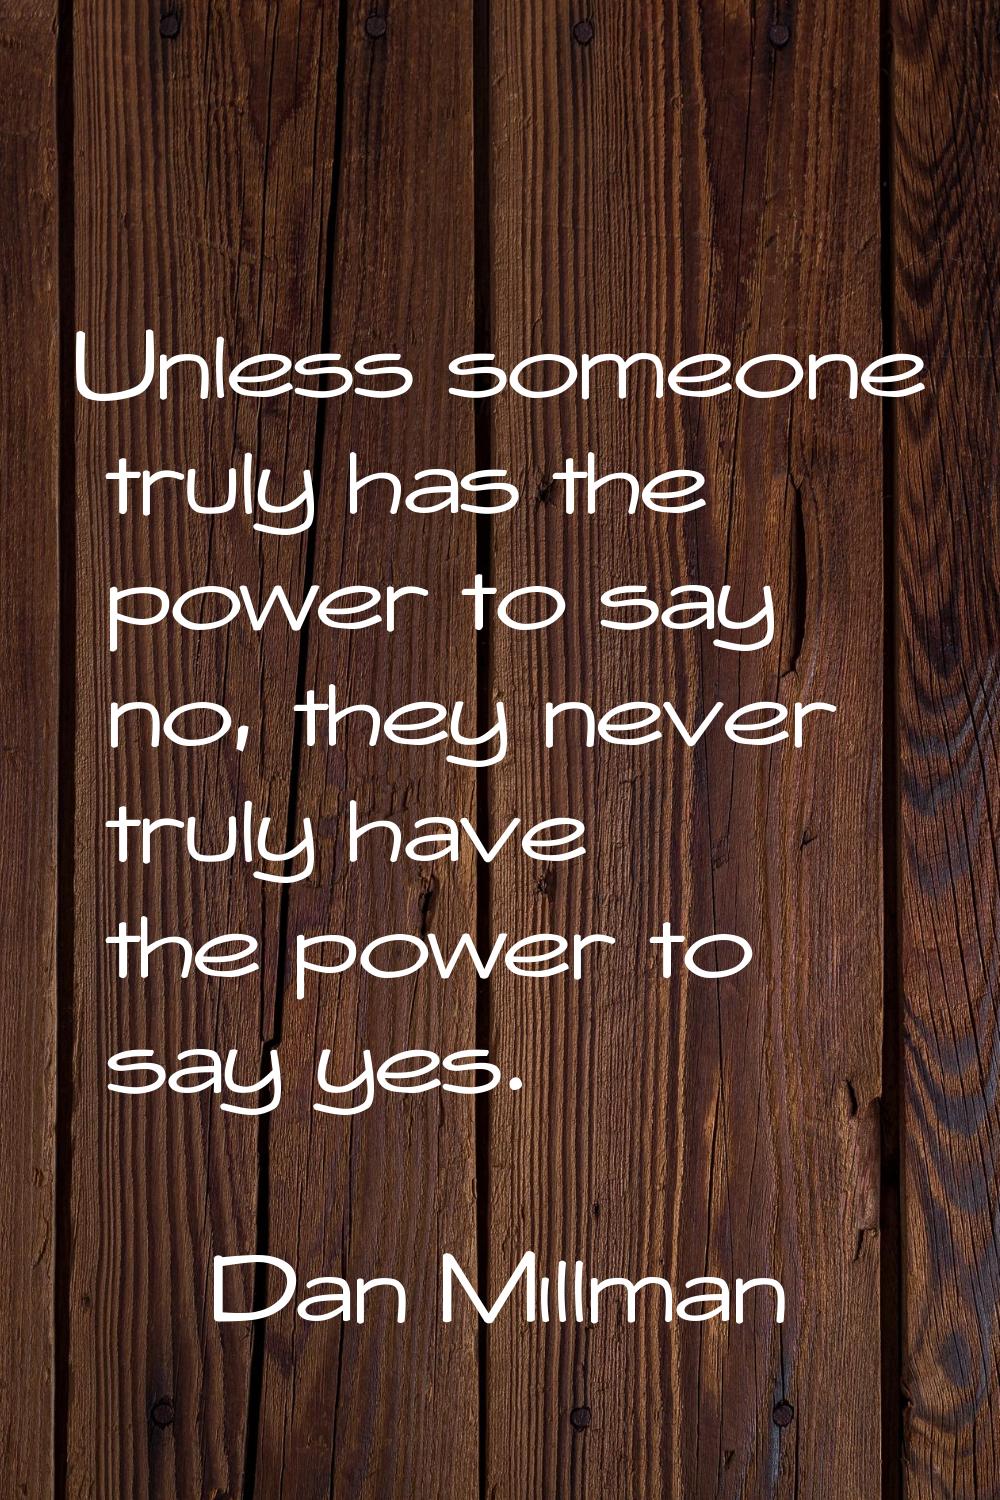 Unless someone truly has the power to say no, they never truly have the power to say yes.